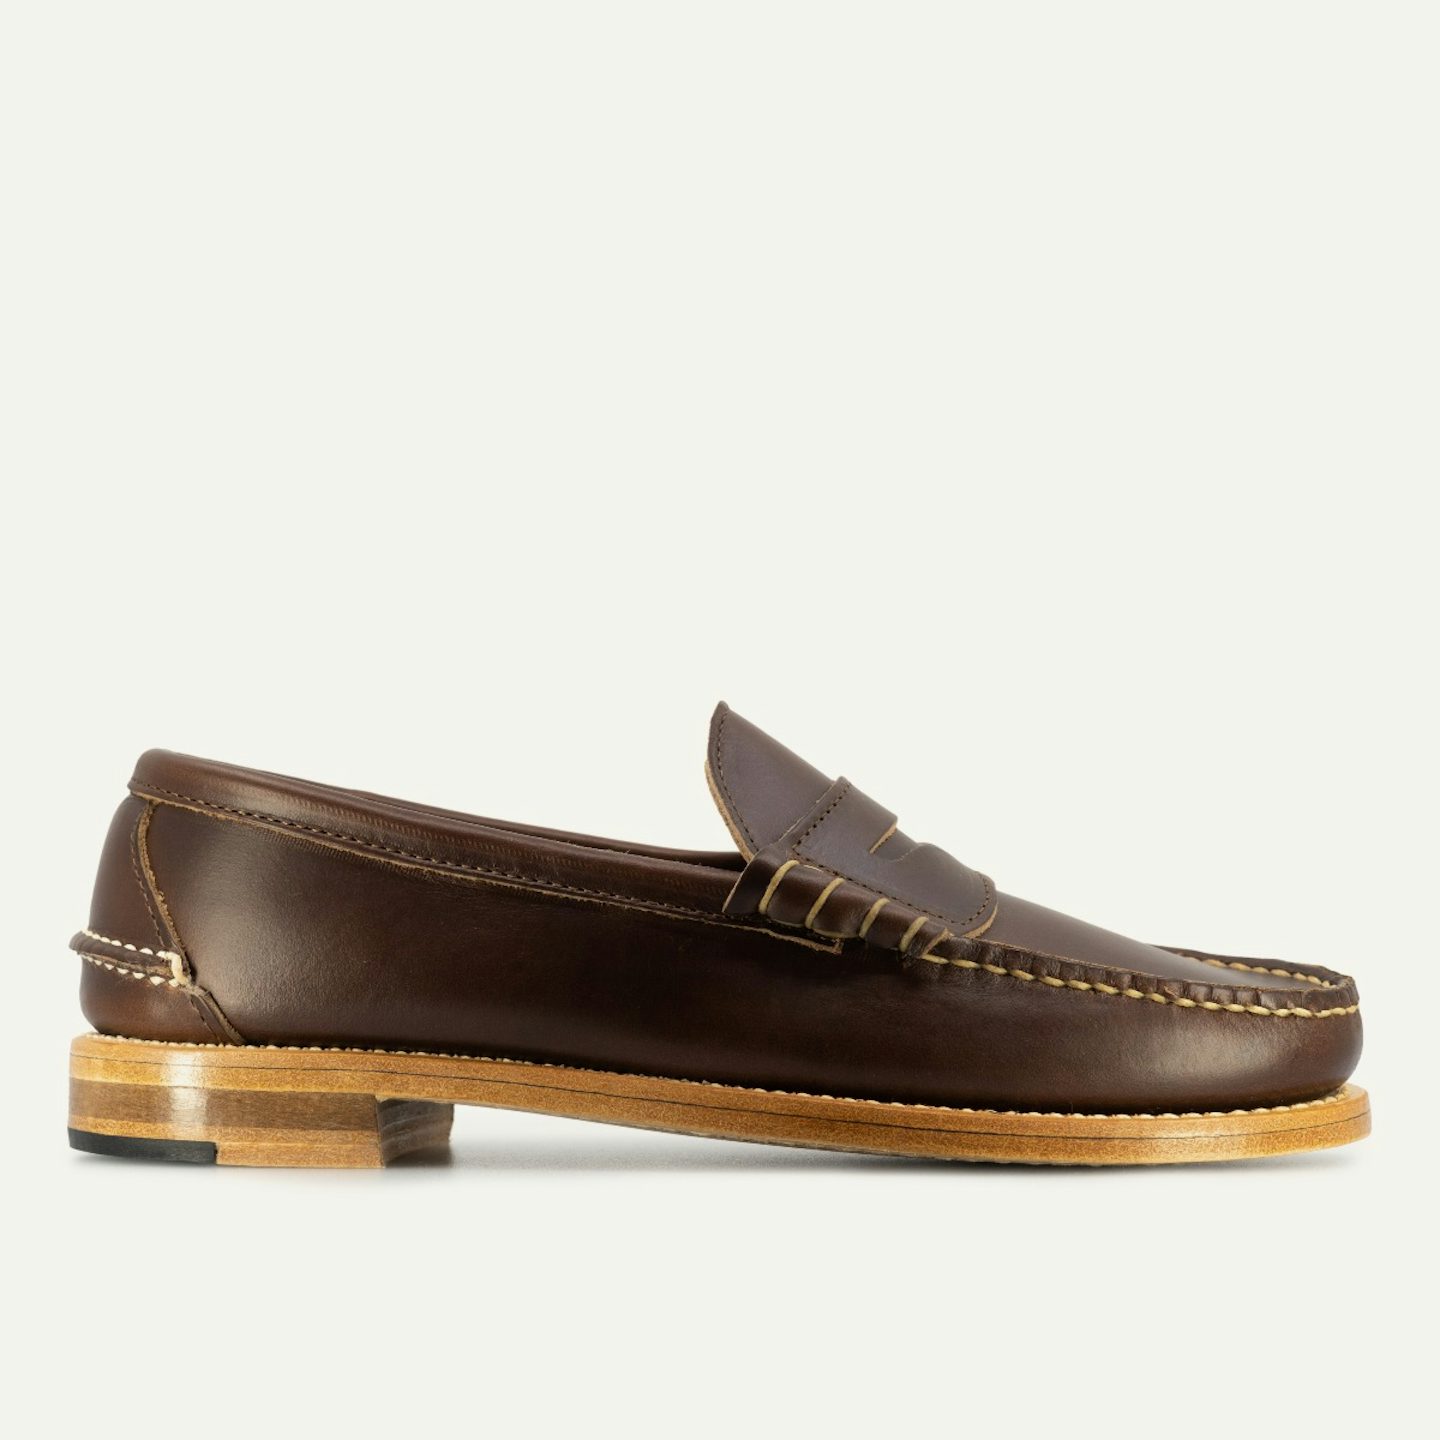 Beefroll Penny Loafer - Brown Leather Sole with Dovetail - Made in USA | Oak Street Bootmakers